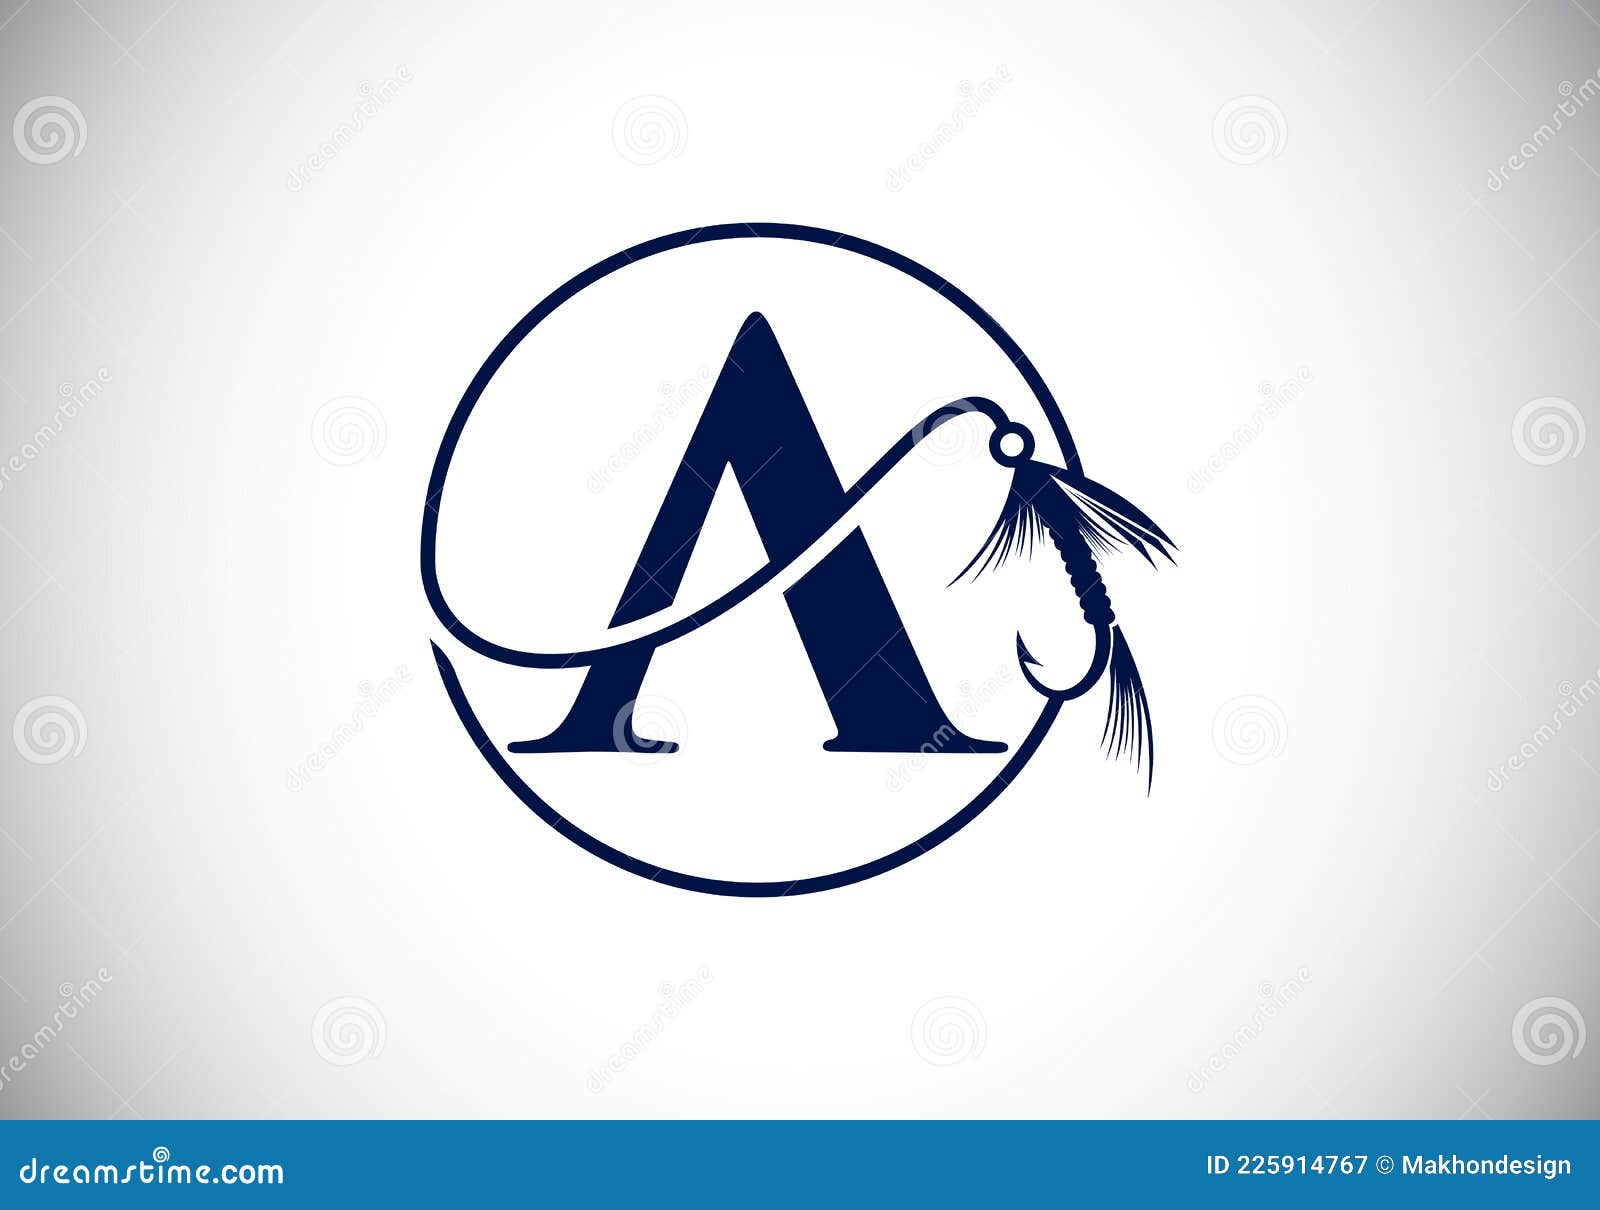 Initial a Monogram Letter Alphabet with Fishing Hook. Fishing Logo